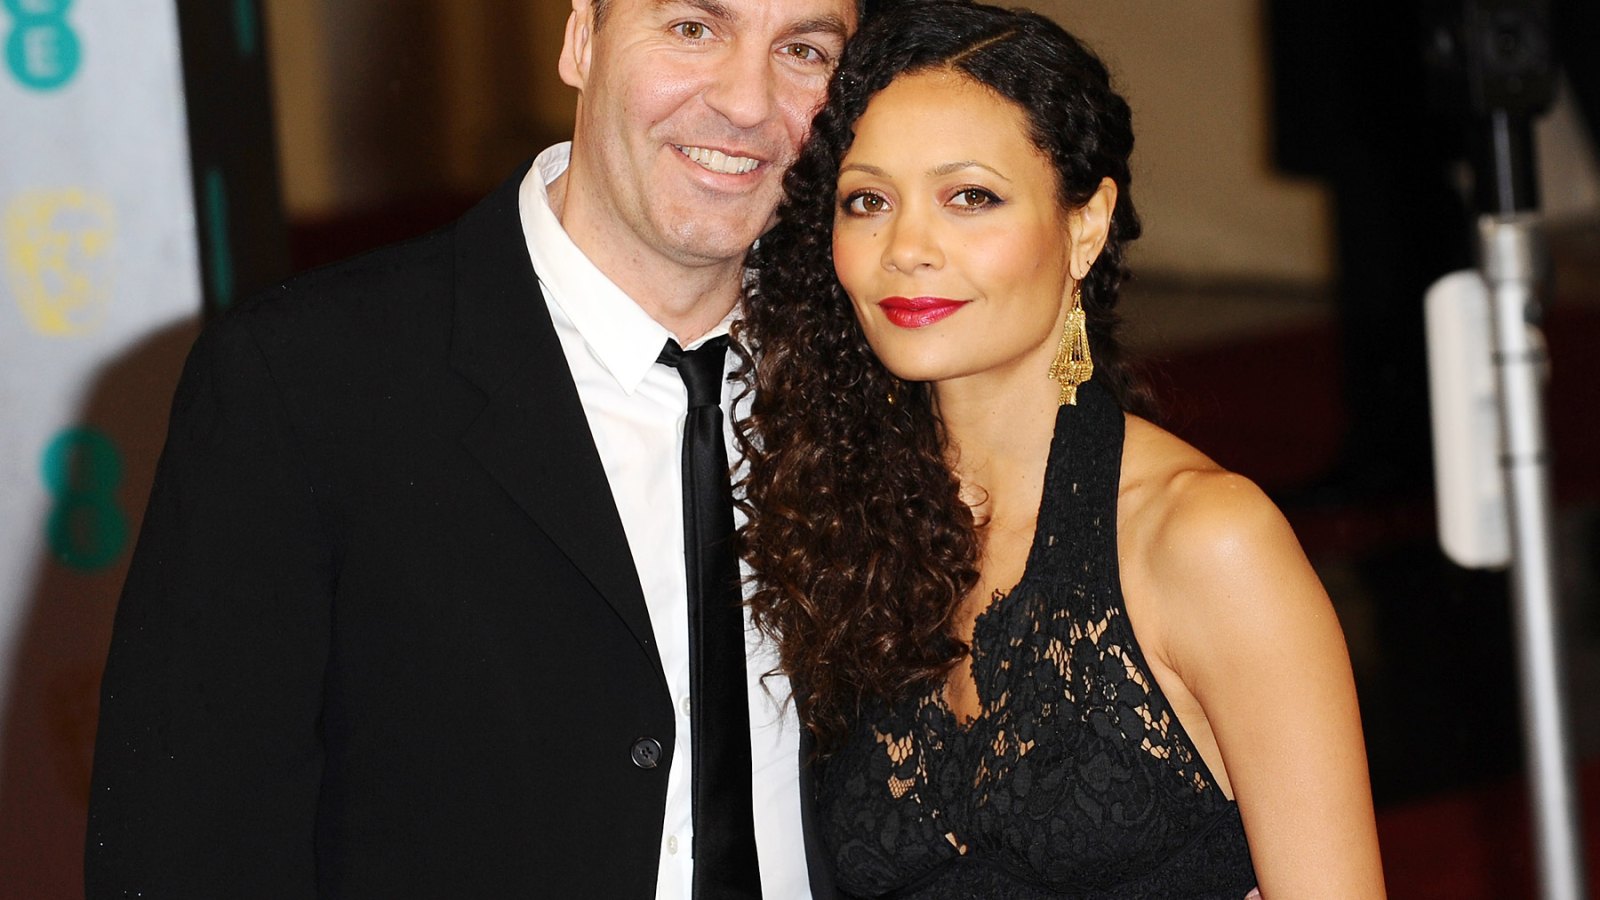 Thandie Newton and husband Ol Parker on February 10, 2013